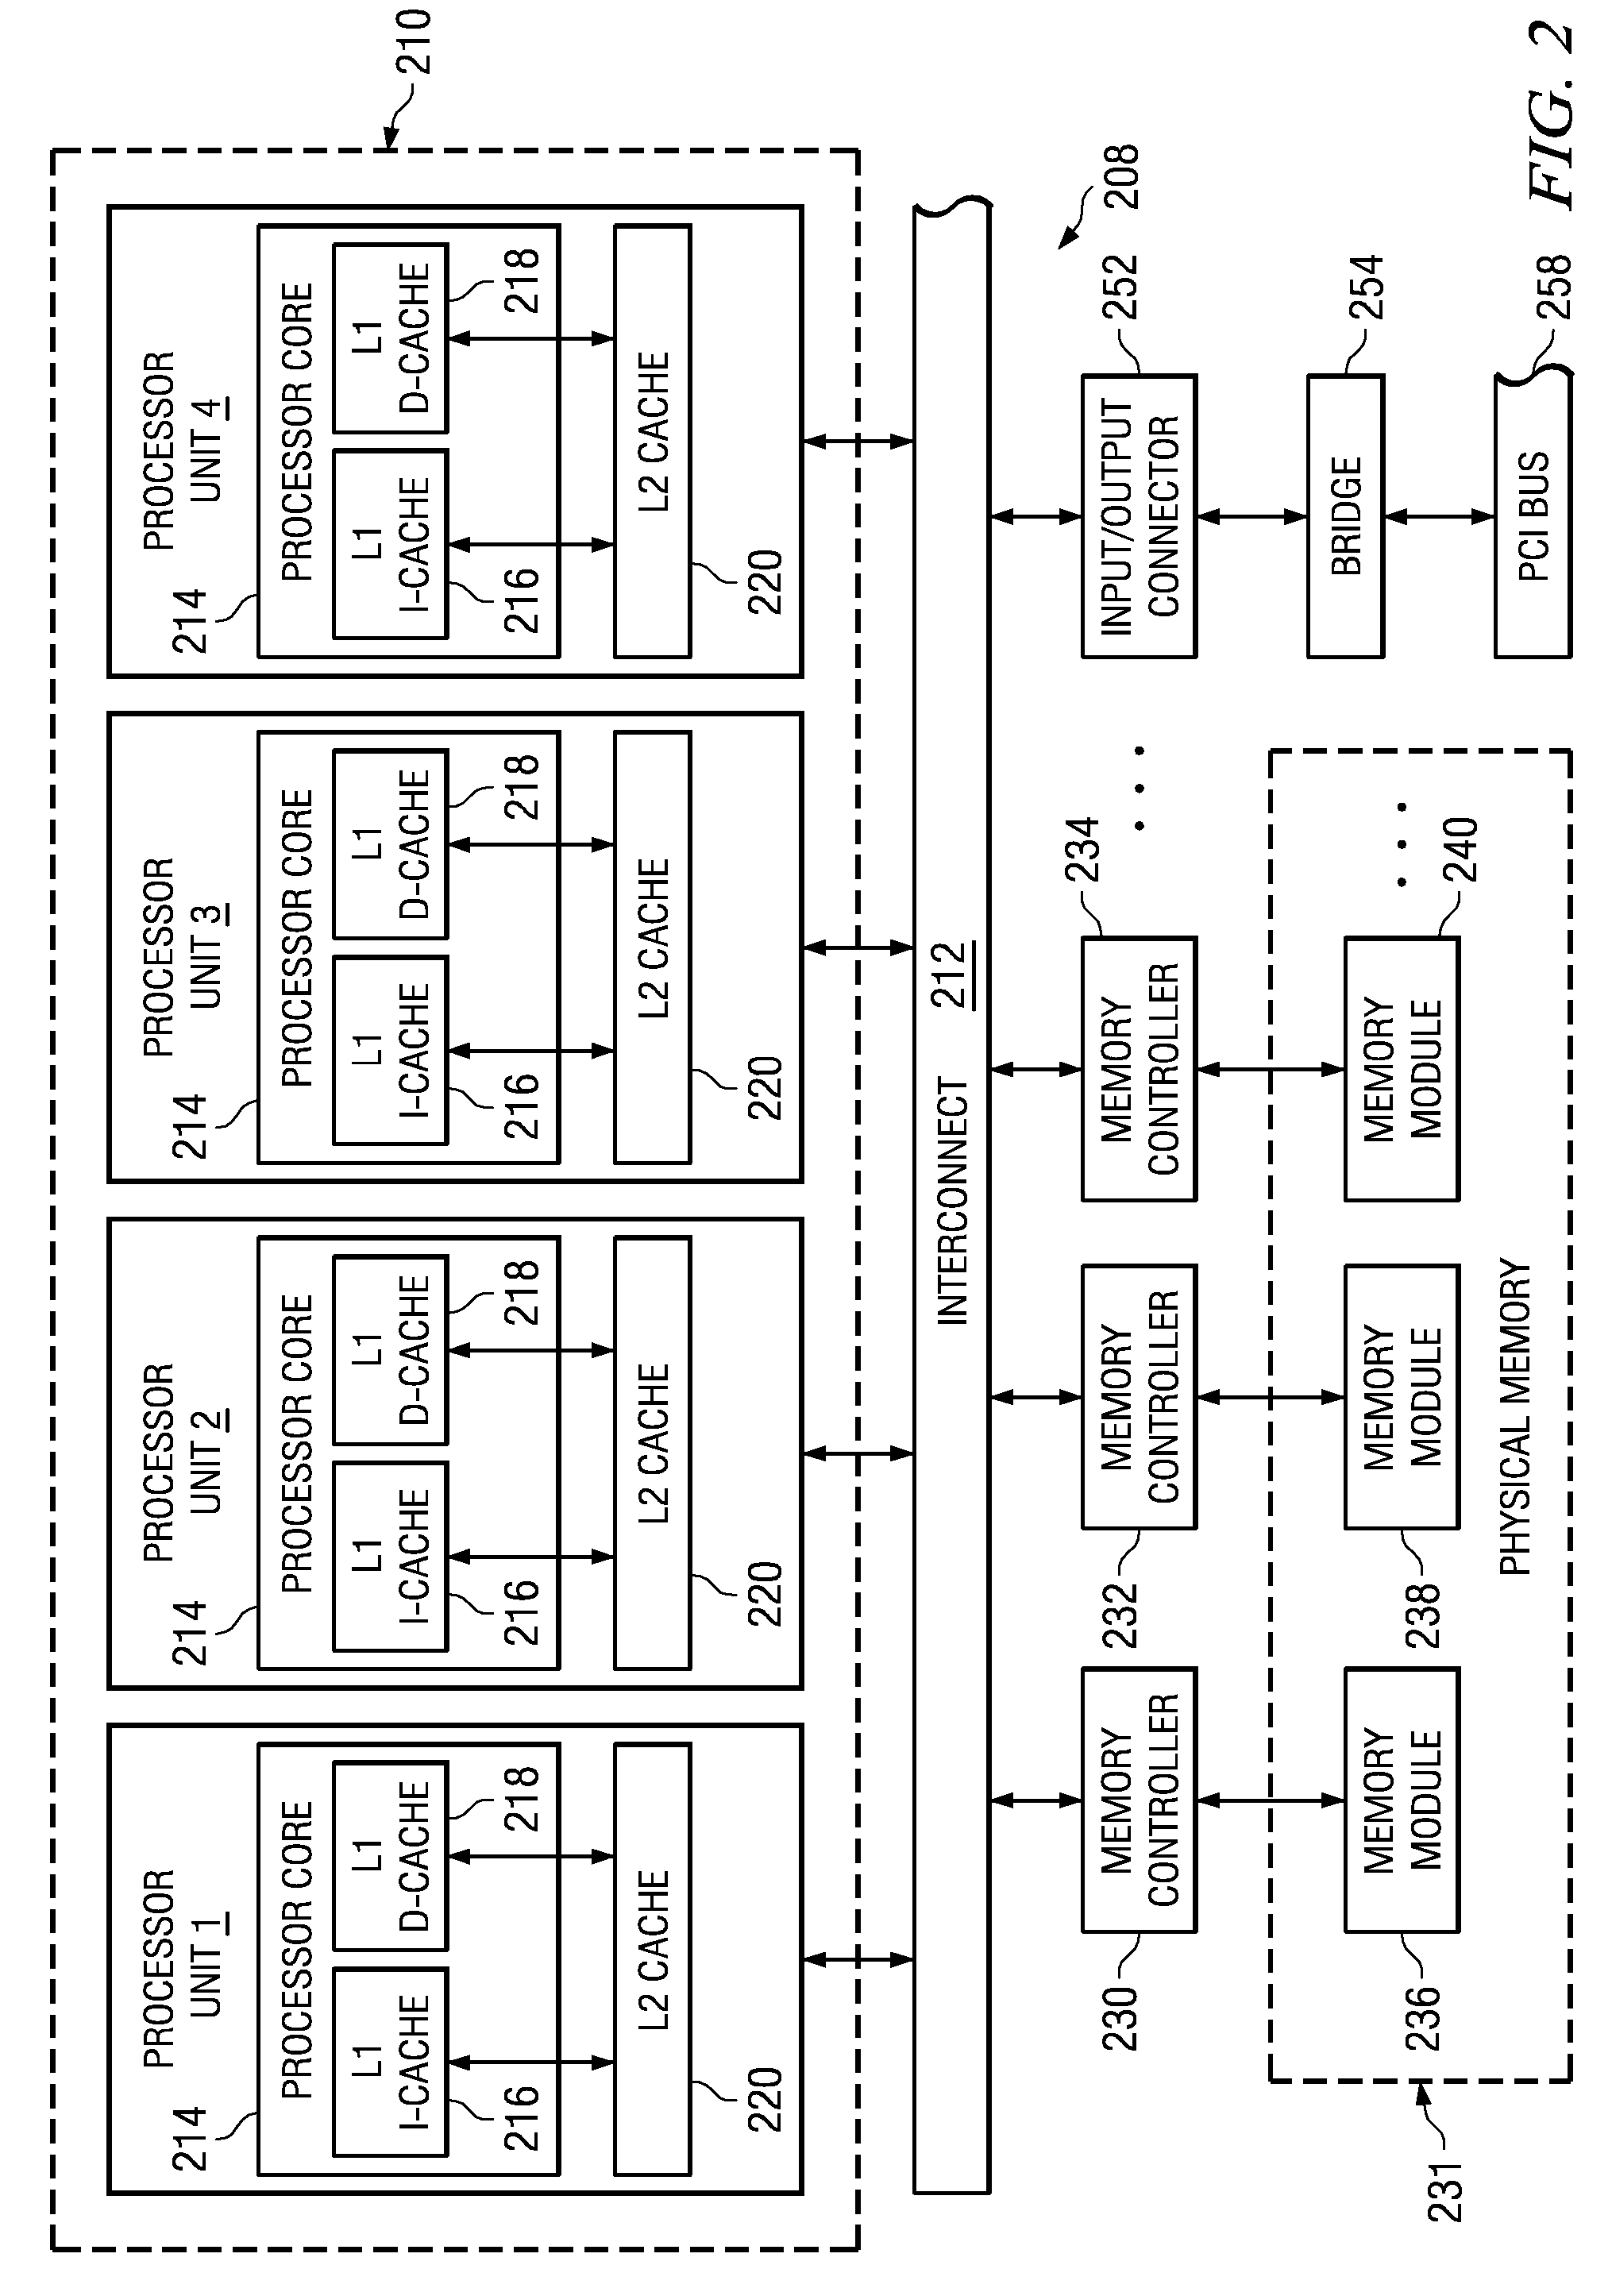 System and Method for Hardware Based Dynamic Load Balancing of Message Passing Interface Tasks